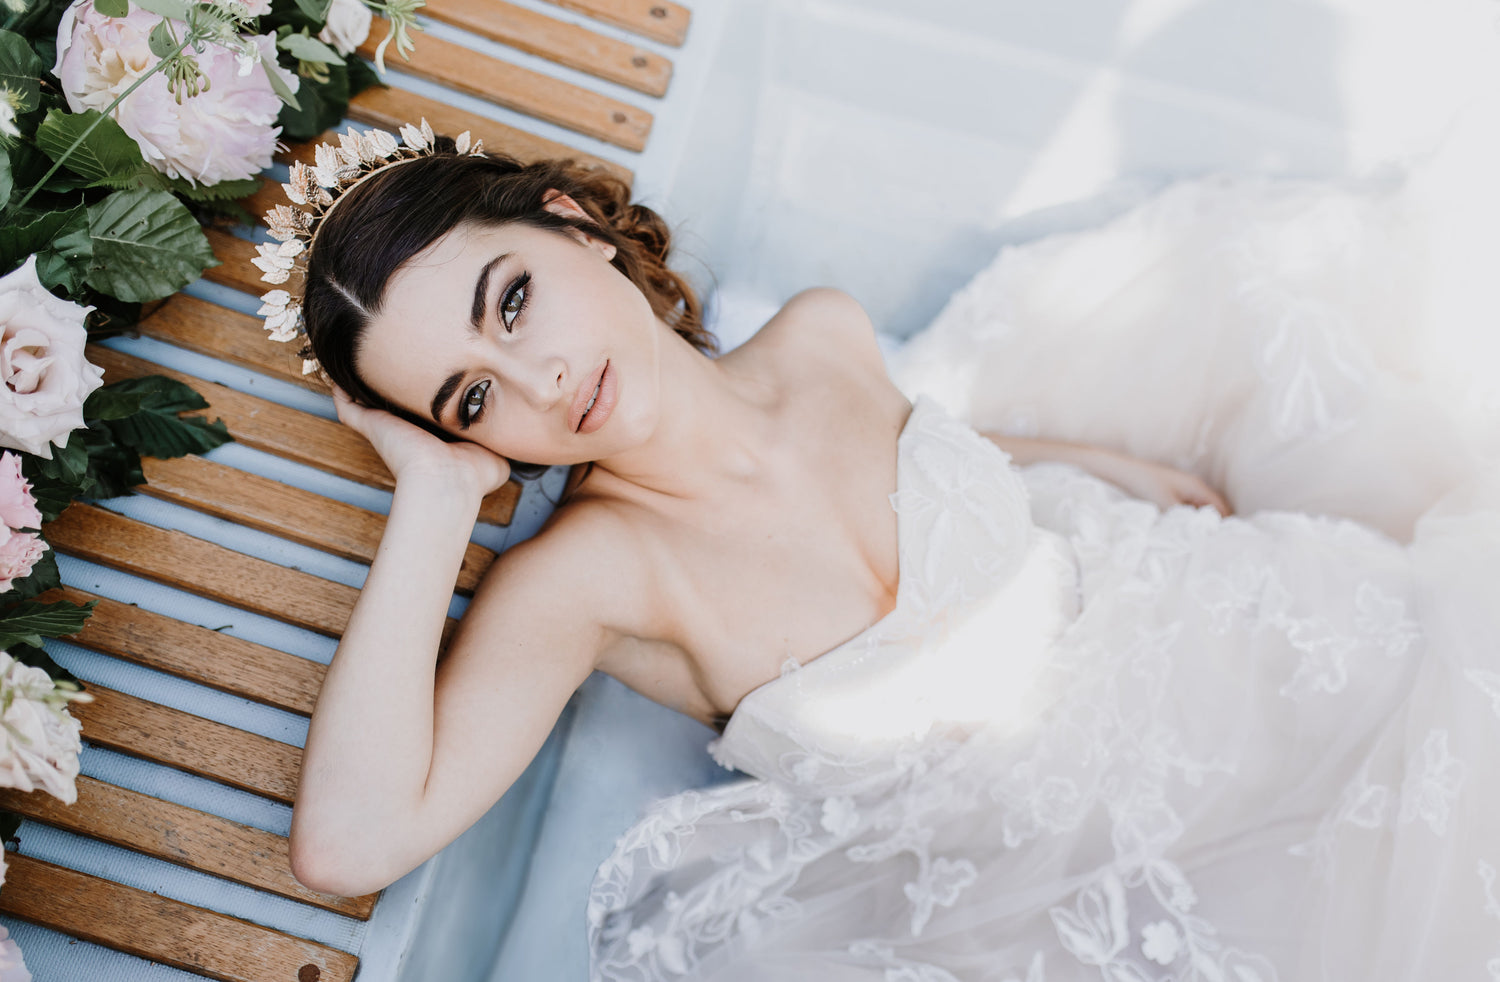 Dark haired model laying creatively with head positioned on slatted wooden base with flowers behind her head. All while wearing an ivory wedding dress and Devoted Gold Leaf Crown.